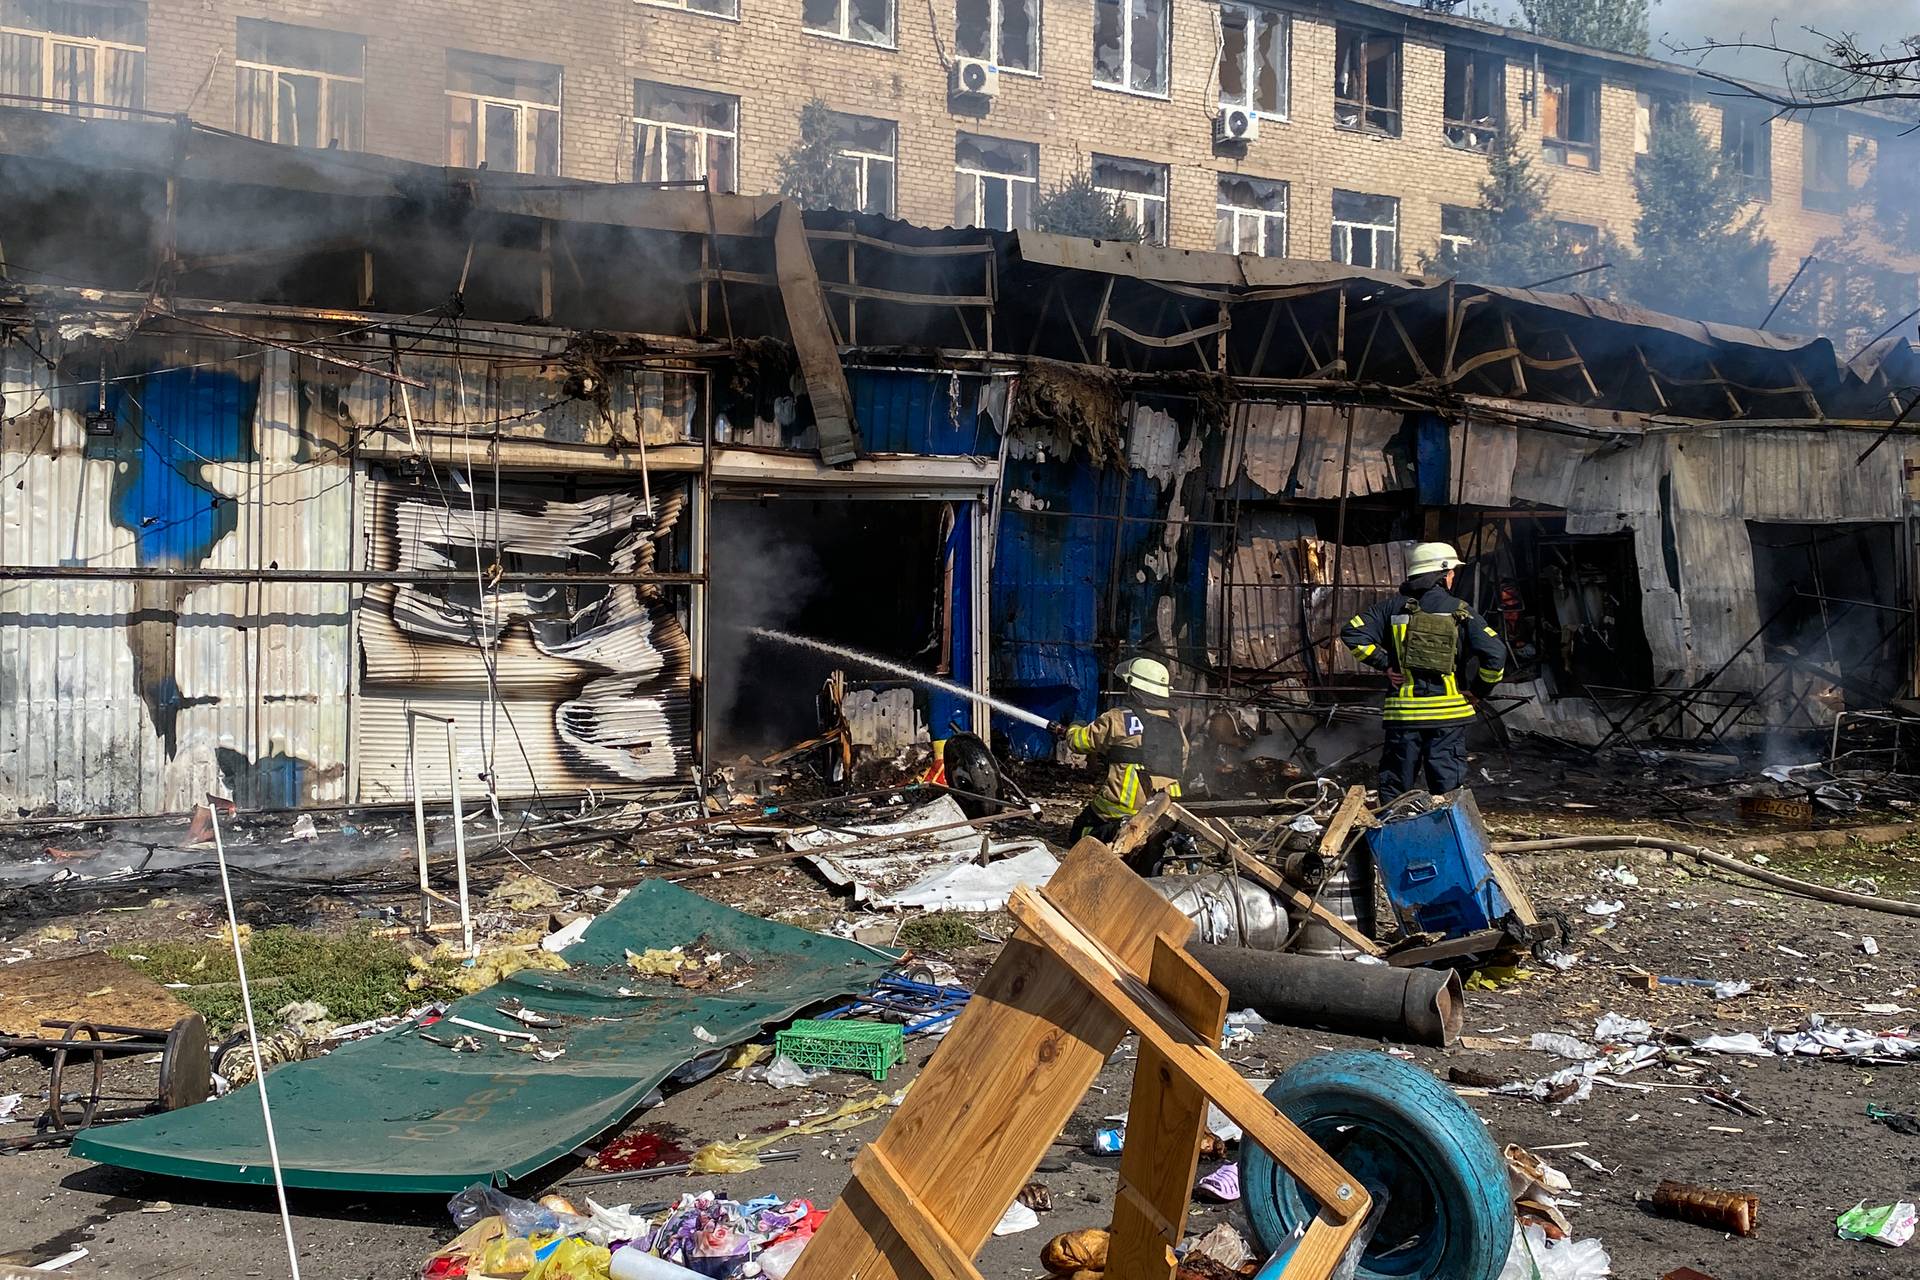 Firefighters extinguish the fire after an attack on the city of Kostiantynivka